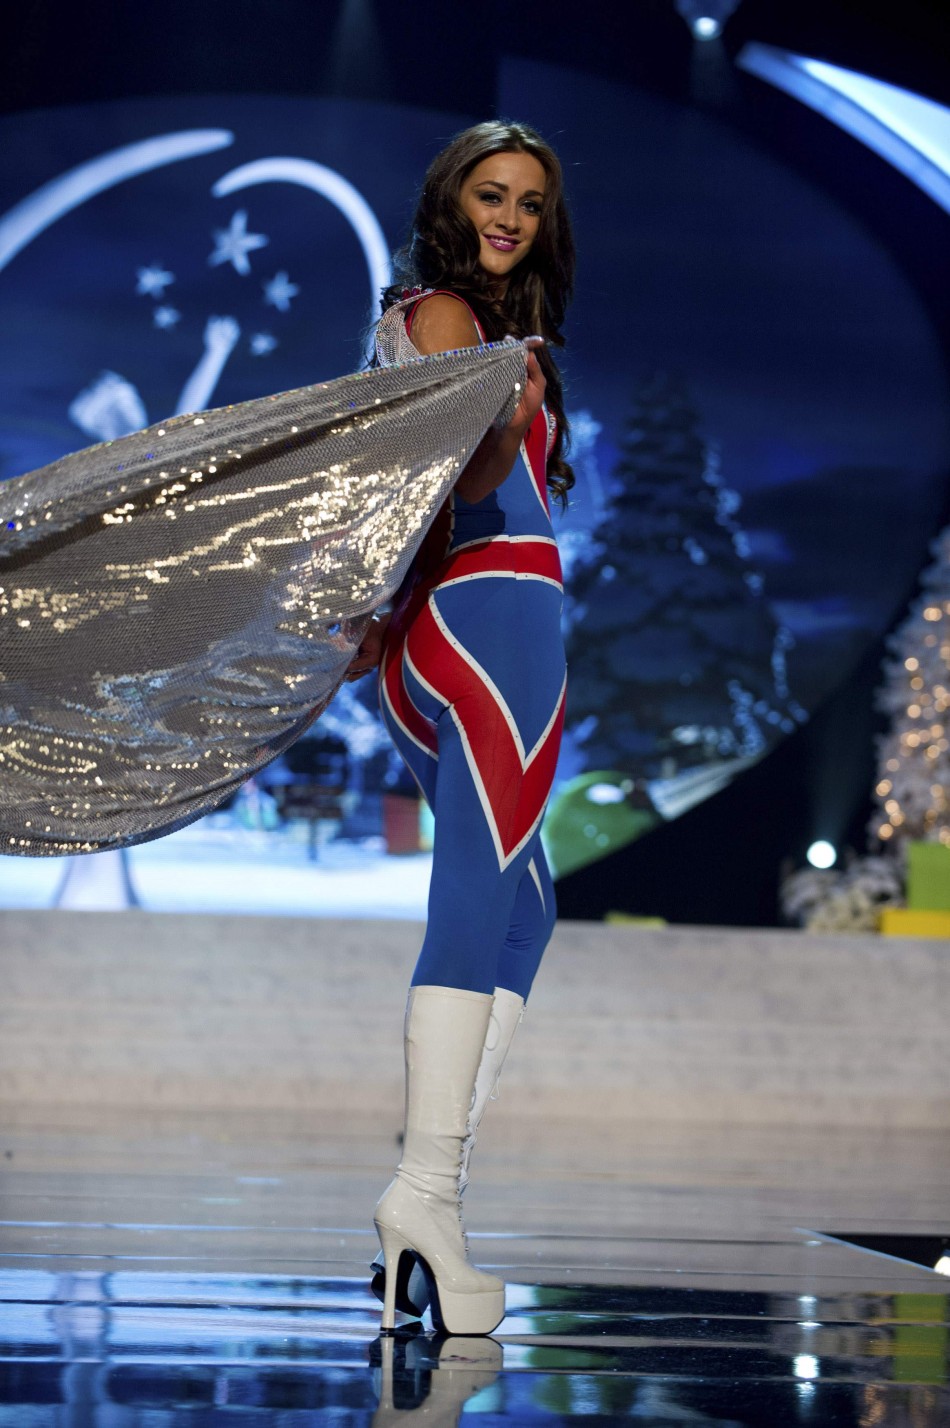 Miss Great Britain Hale on stage at the 2012 Miss Universe National Costume Show at PH Live in Las Vegas